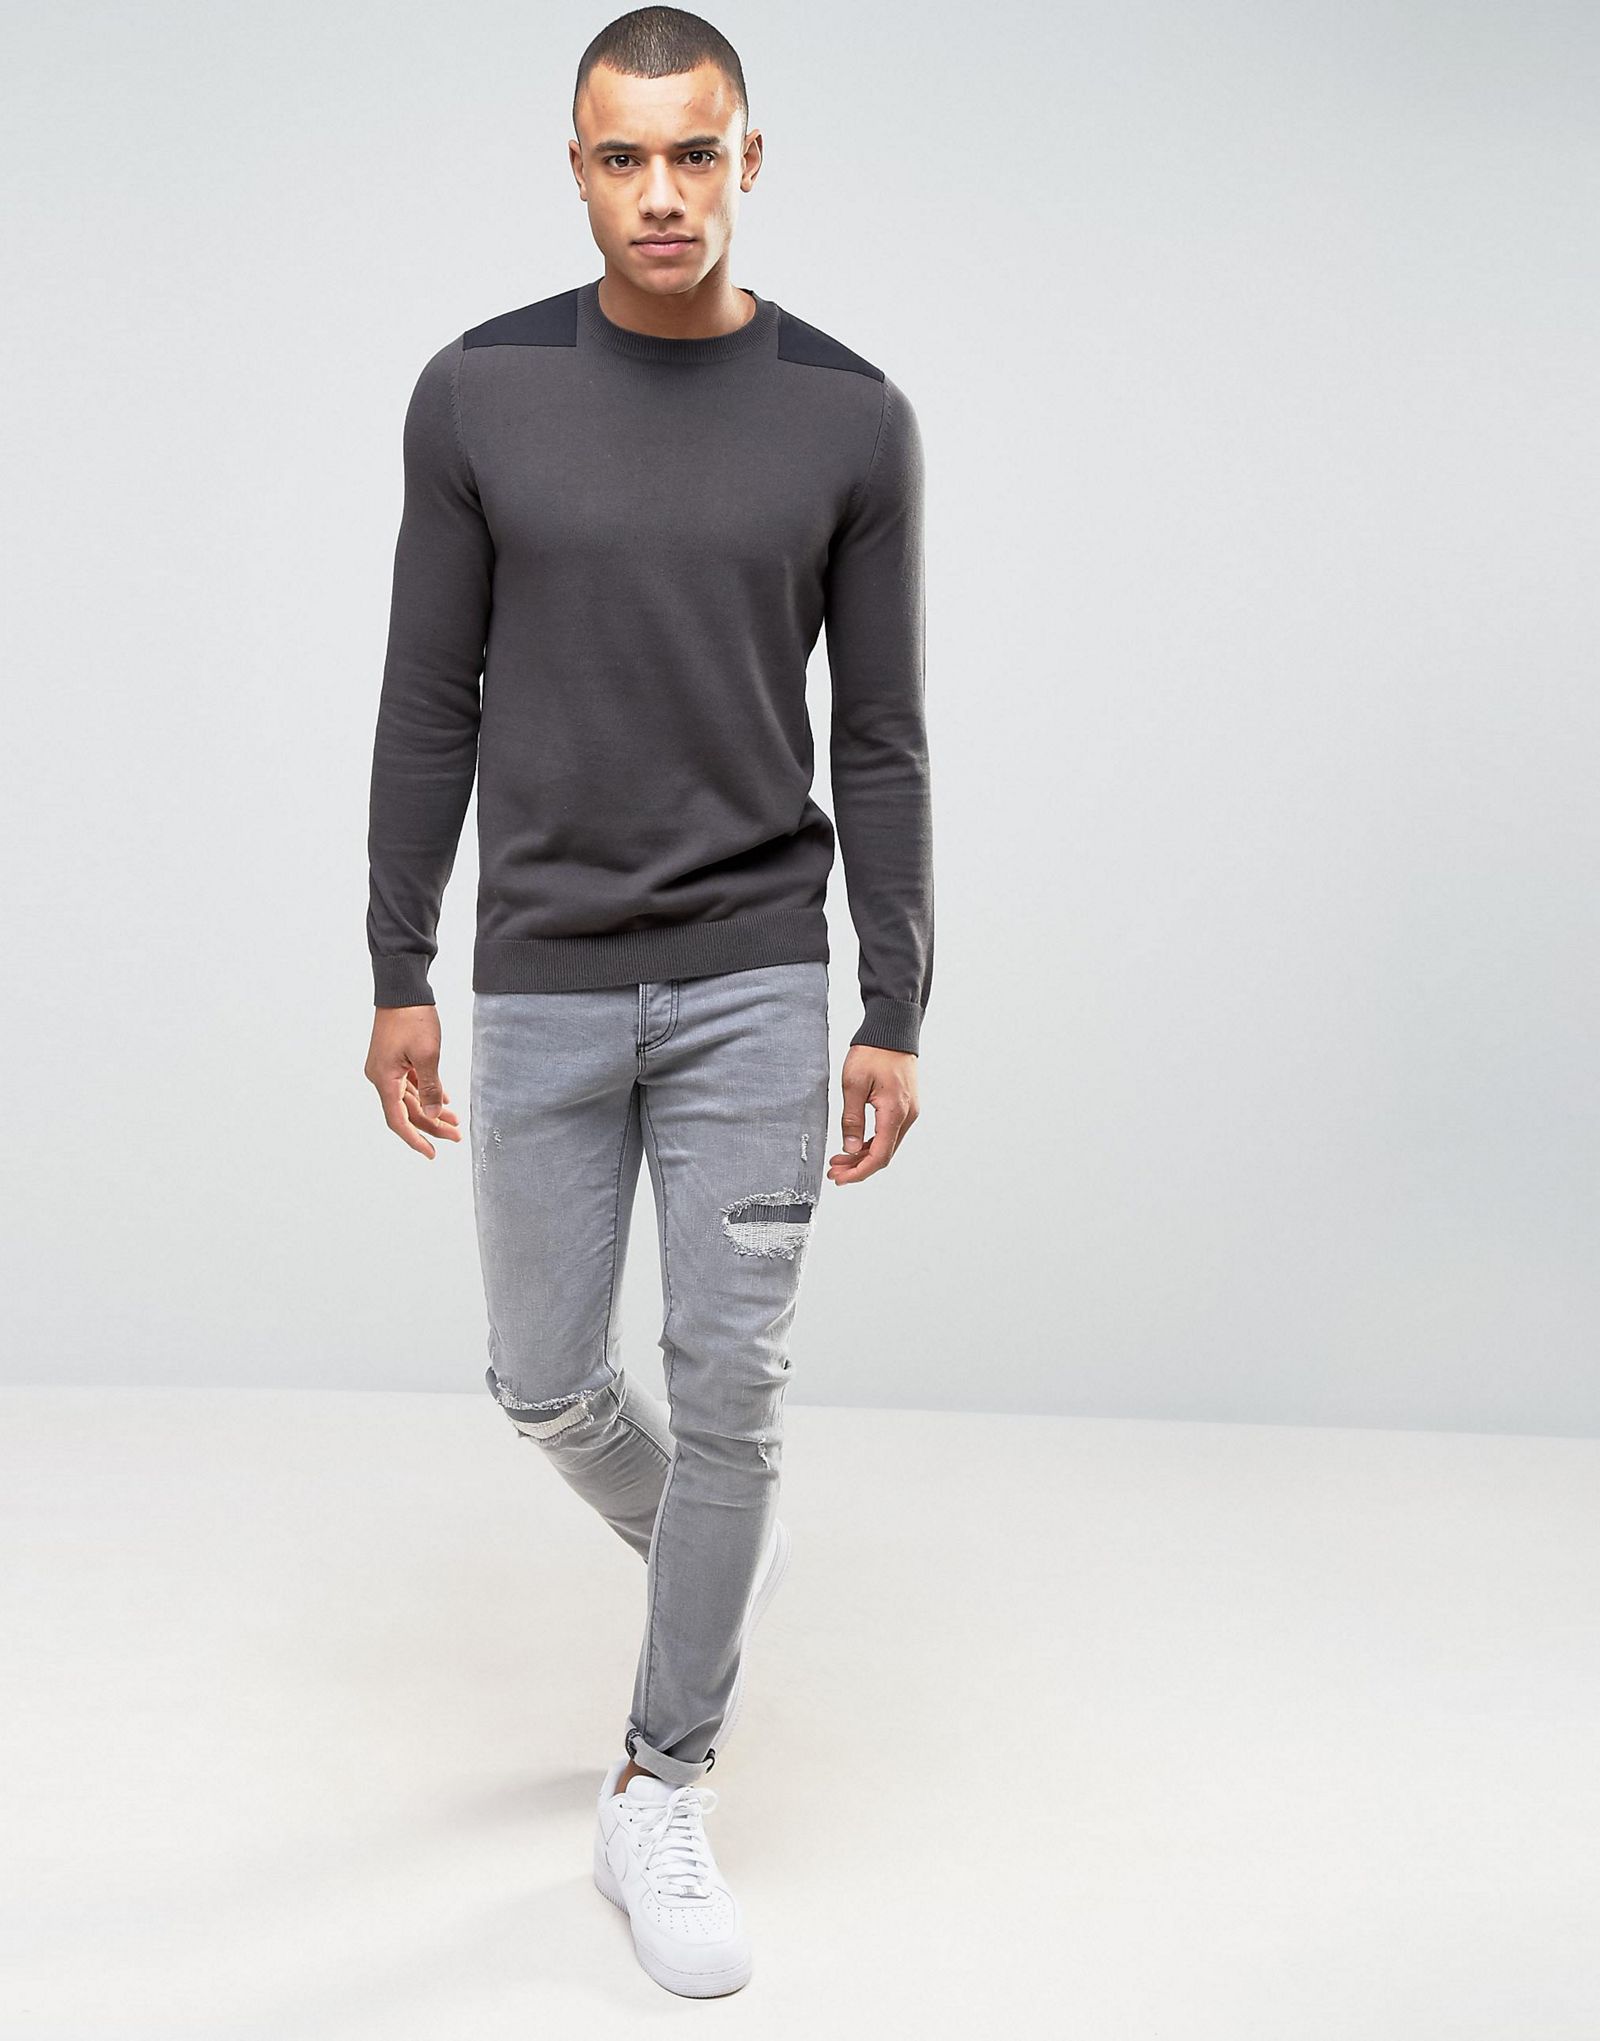 New Look Jumper With Patch Detail In Dark Grey